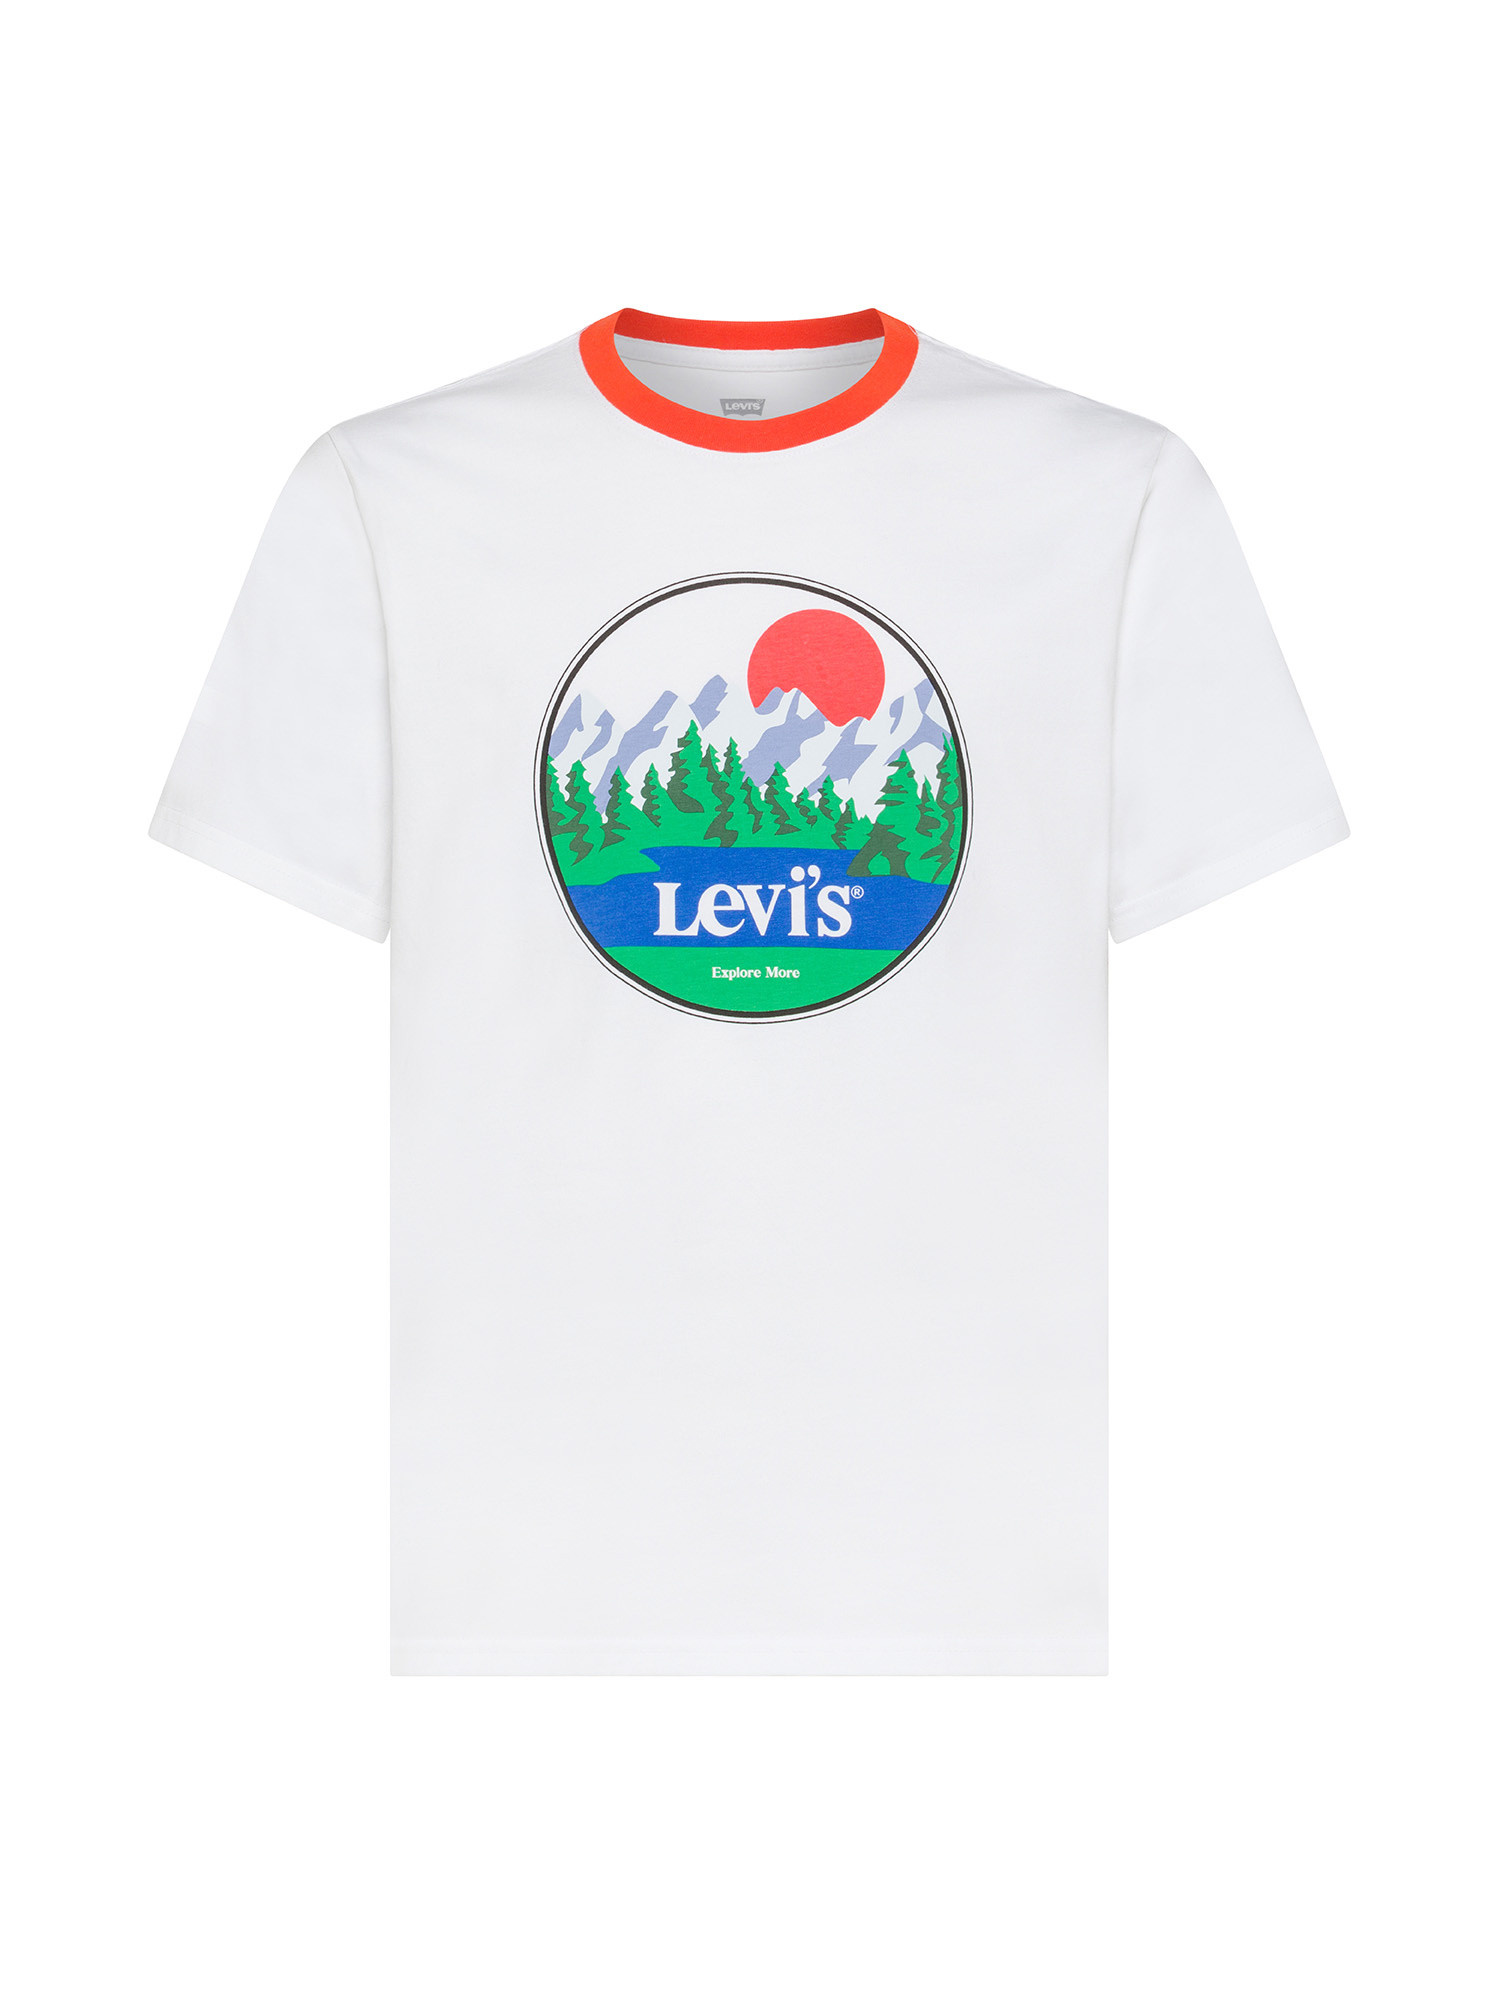 Levi's - T-shirt with print, White, large image number 0